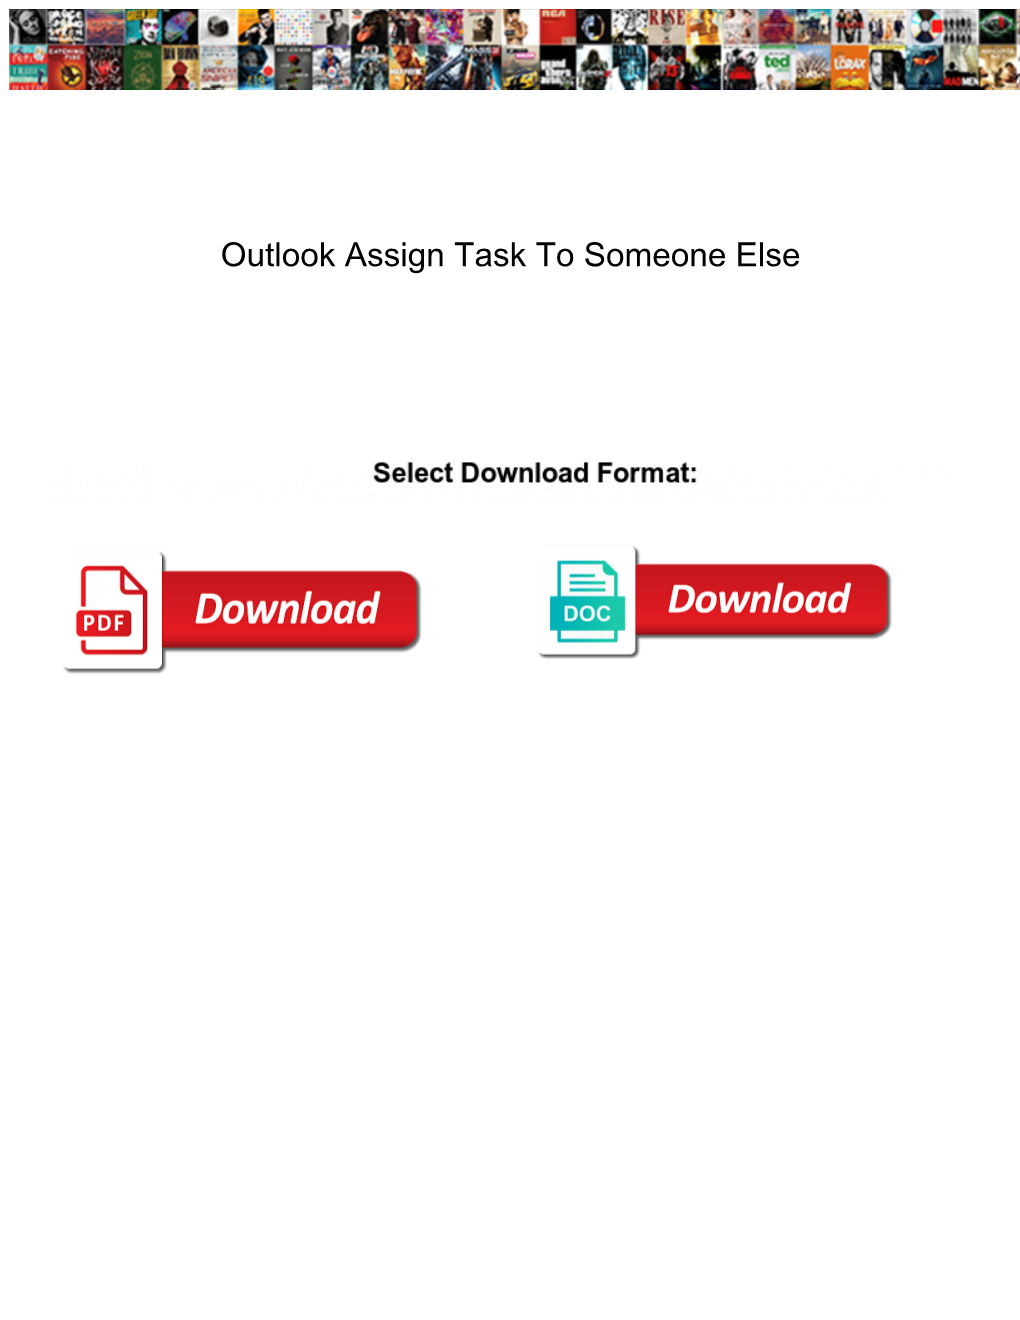 Outlook Assign Task to Someone Else